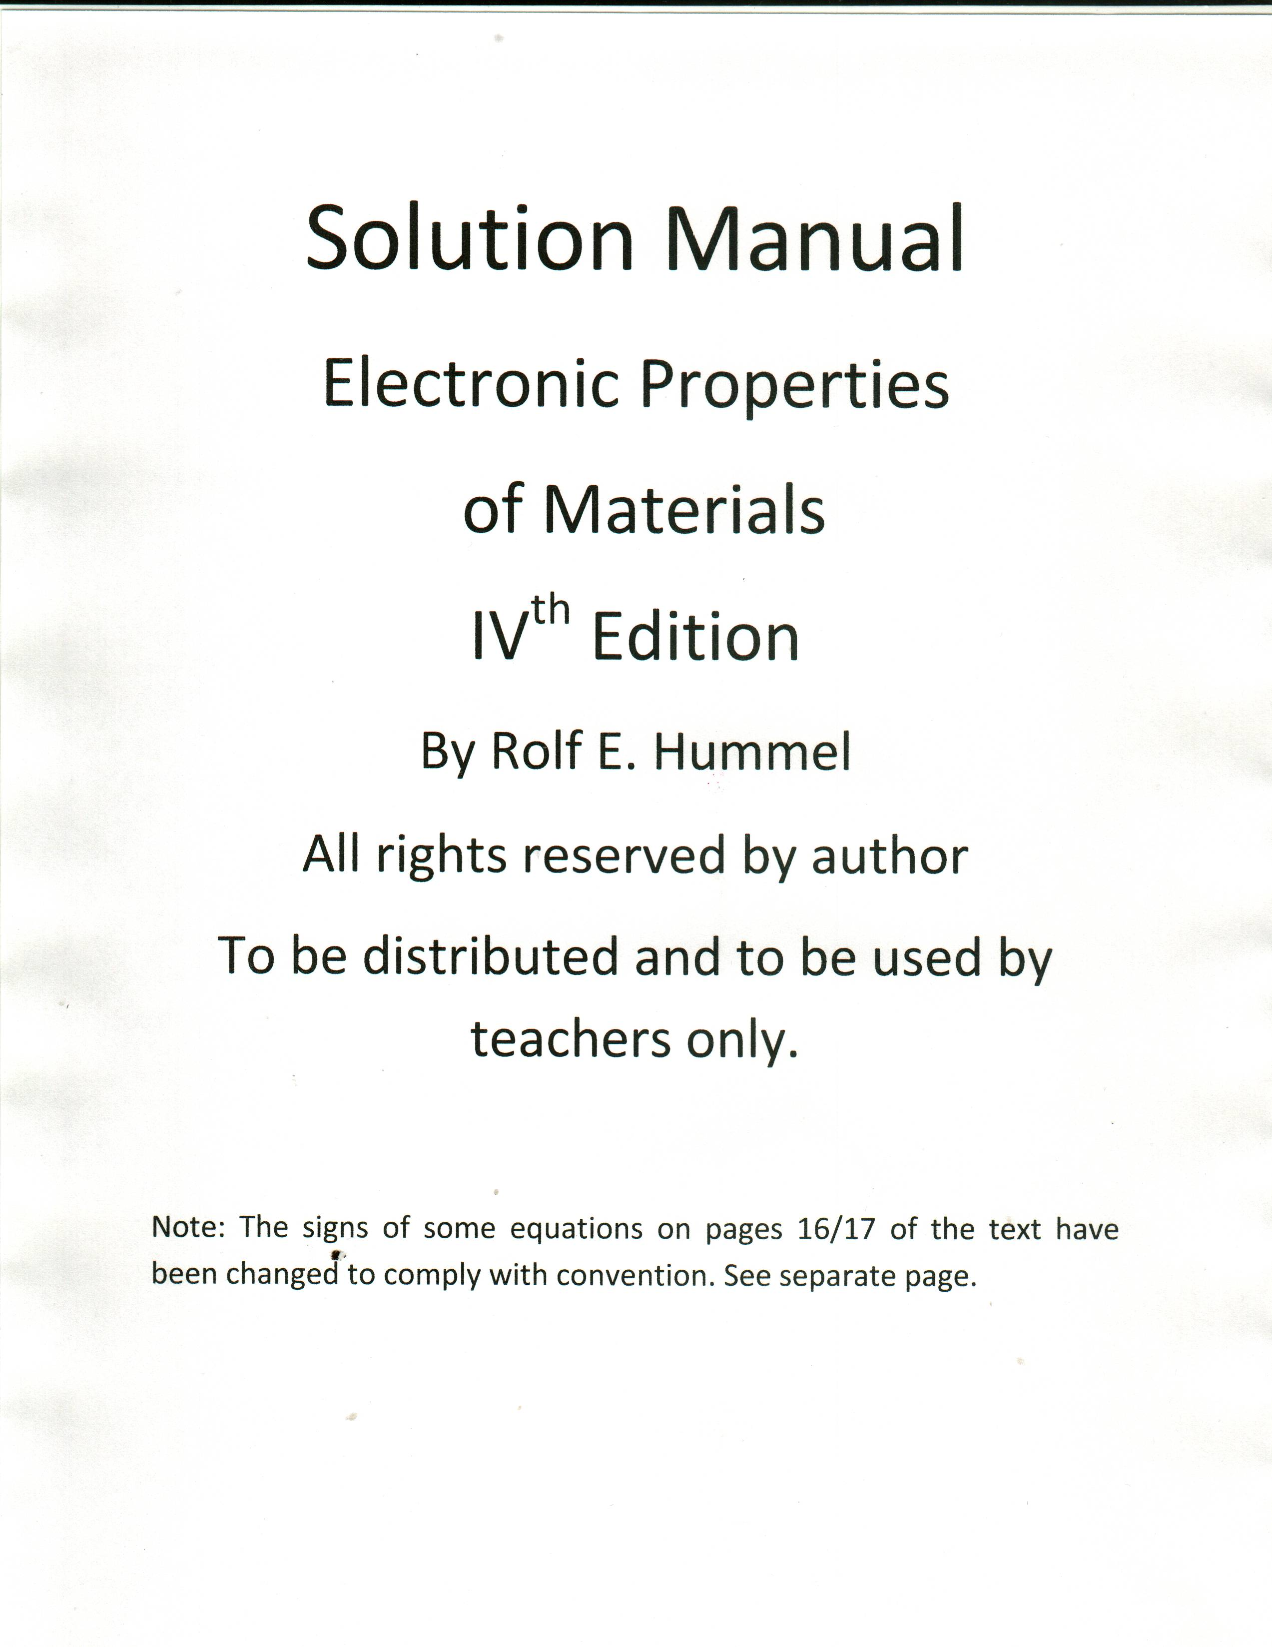 Download free solution manual of Electronic Properties of Materials 4th edition written by Hummel eBook in pdf format